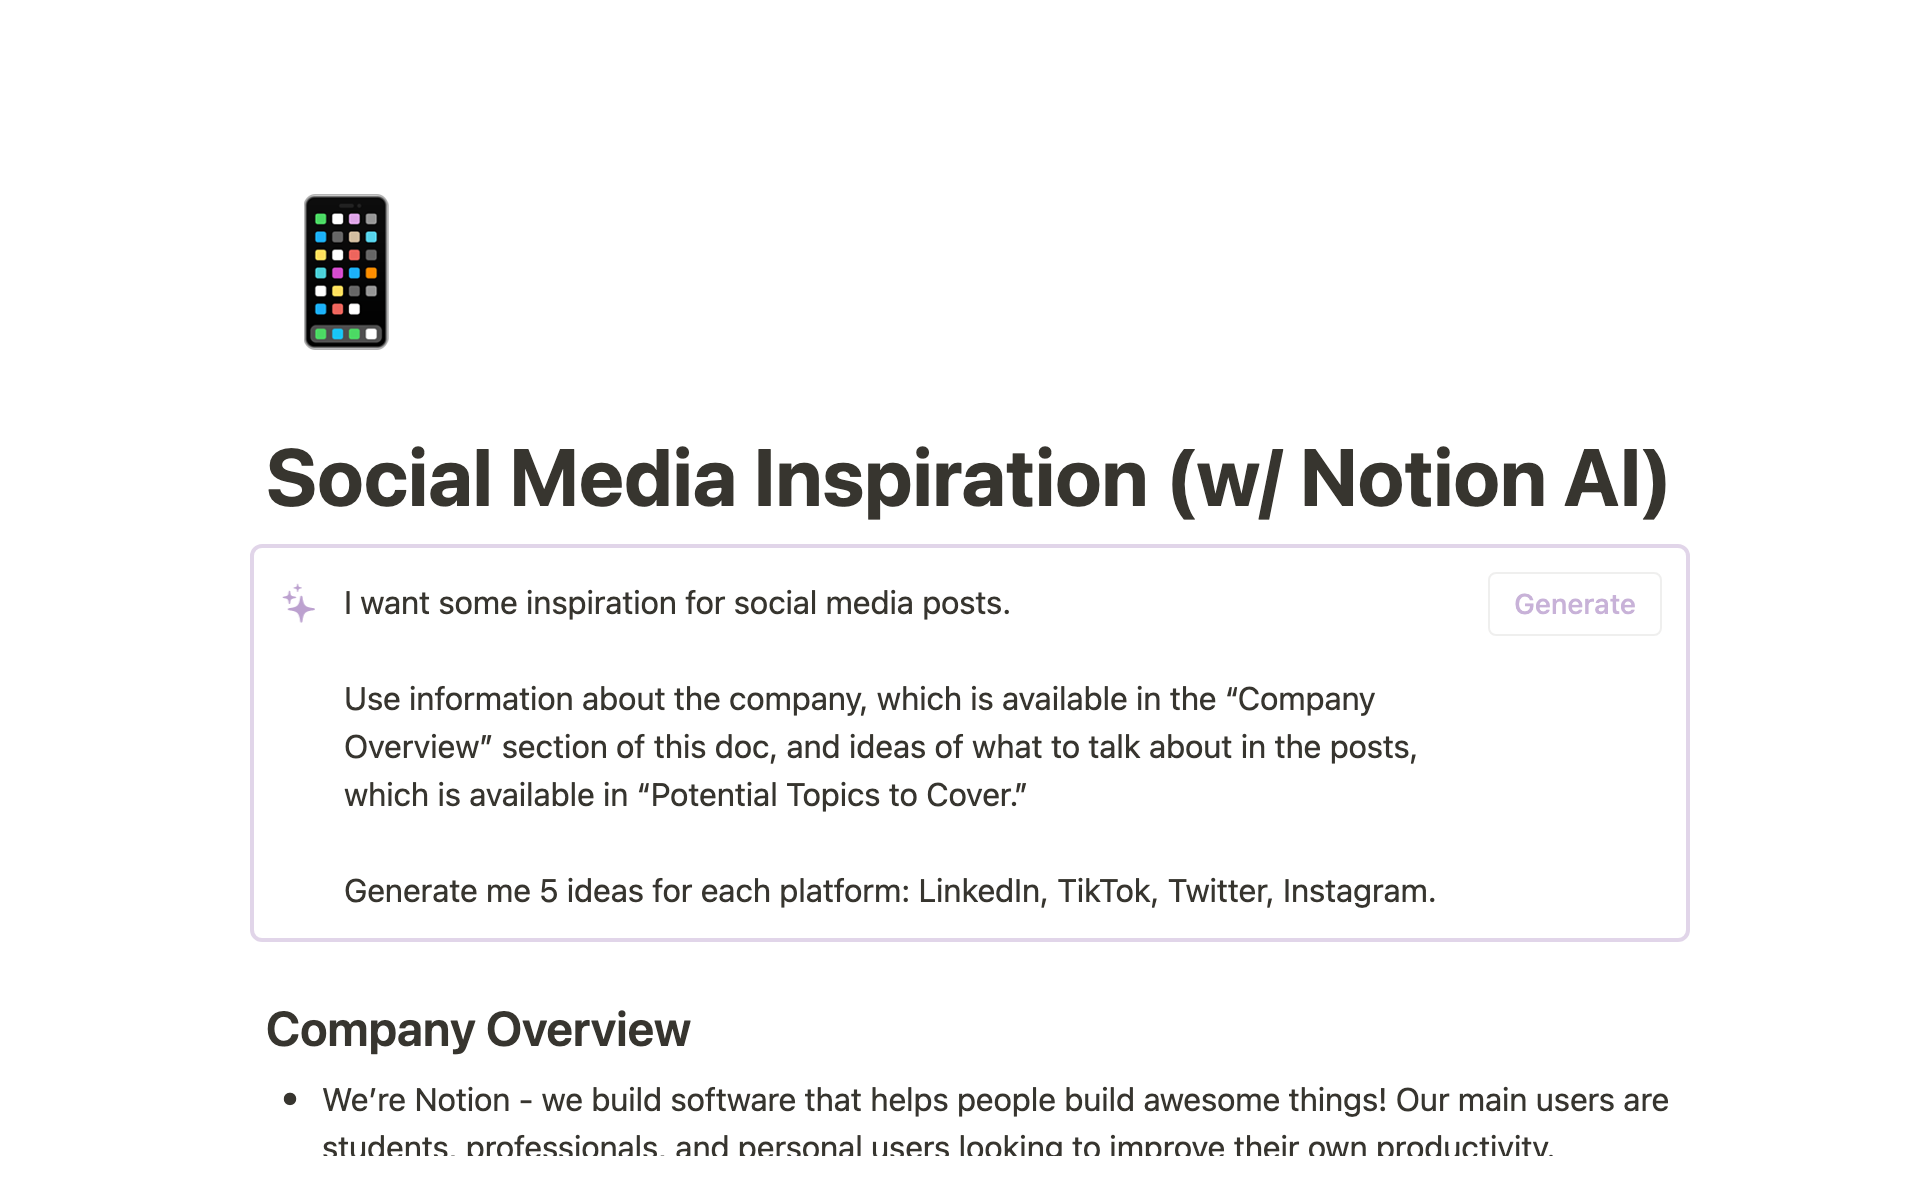 Feeling uninspired on what your next social media posts should be? Let Notion AI give you some inspiration.